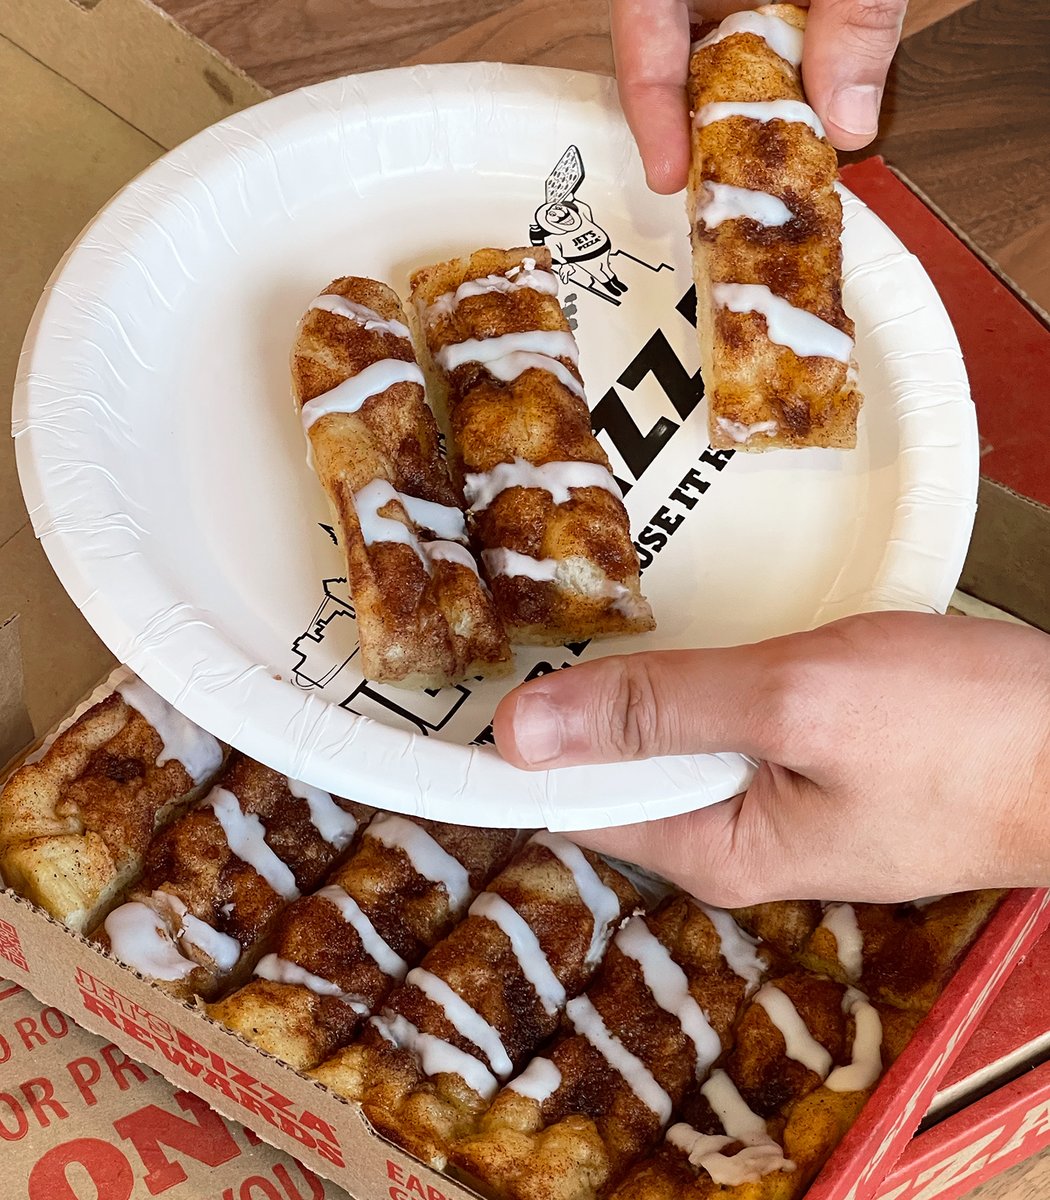 This is exactly what we were craving.